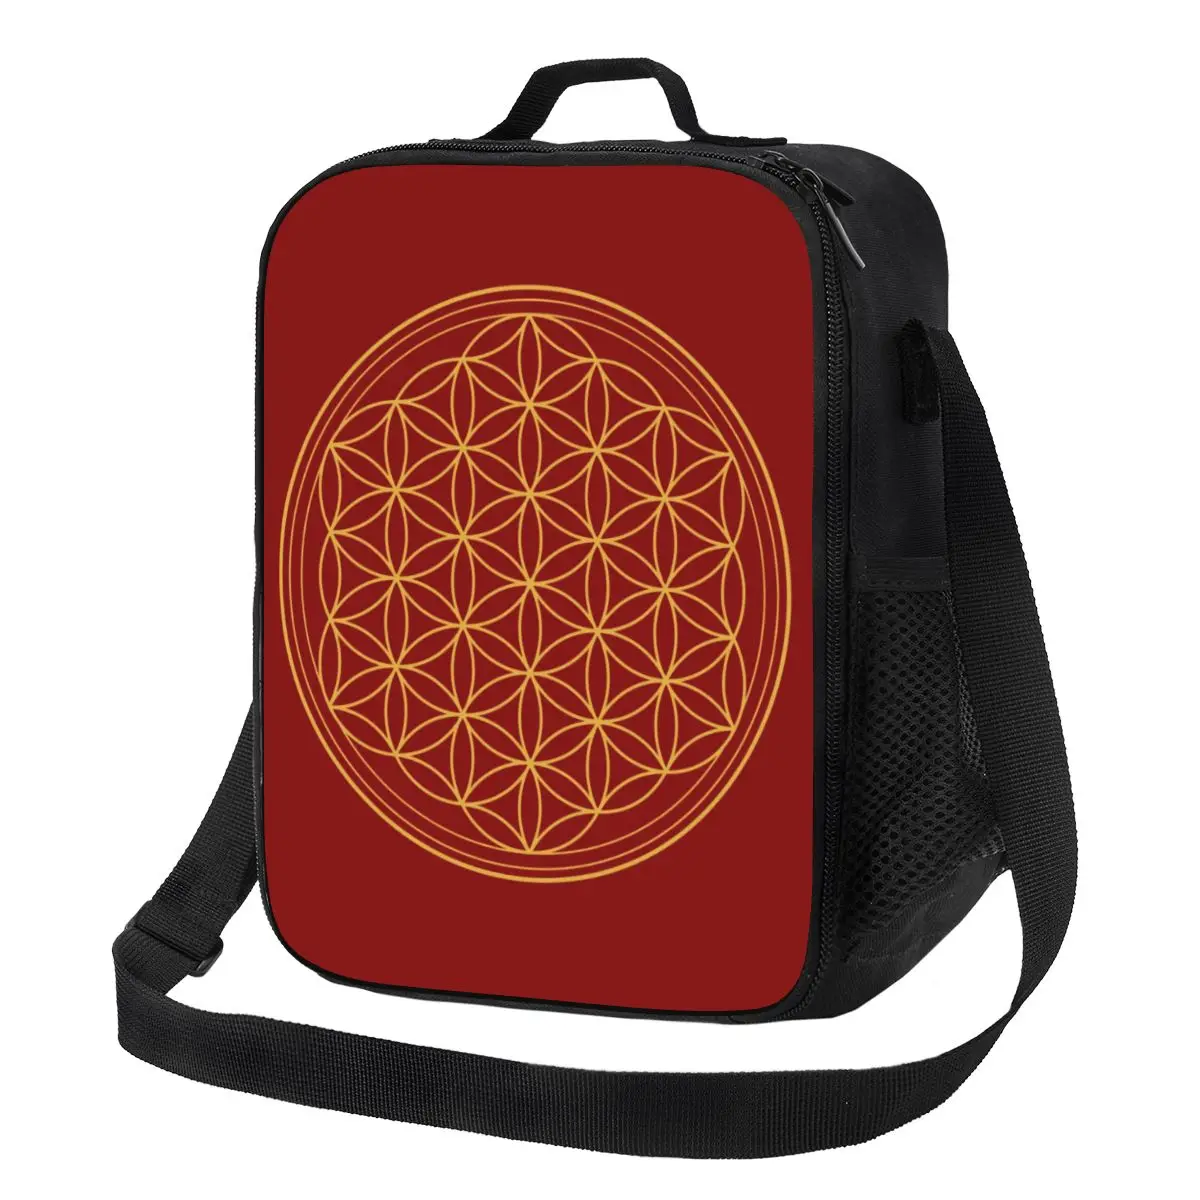 

Flower Of Life Power Thermal Insulated Lunch Bag Sacred Geometry Portable Lunch Tote Camping Travel Multifunction Bento Food Box